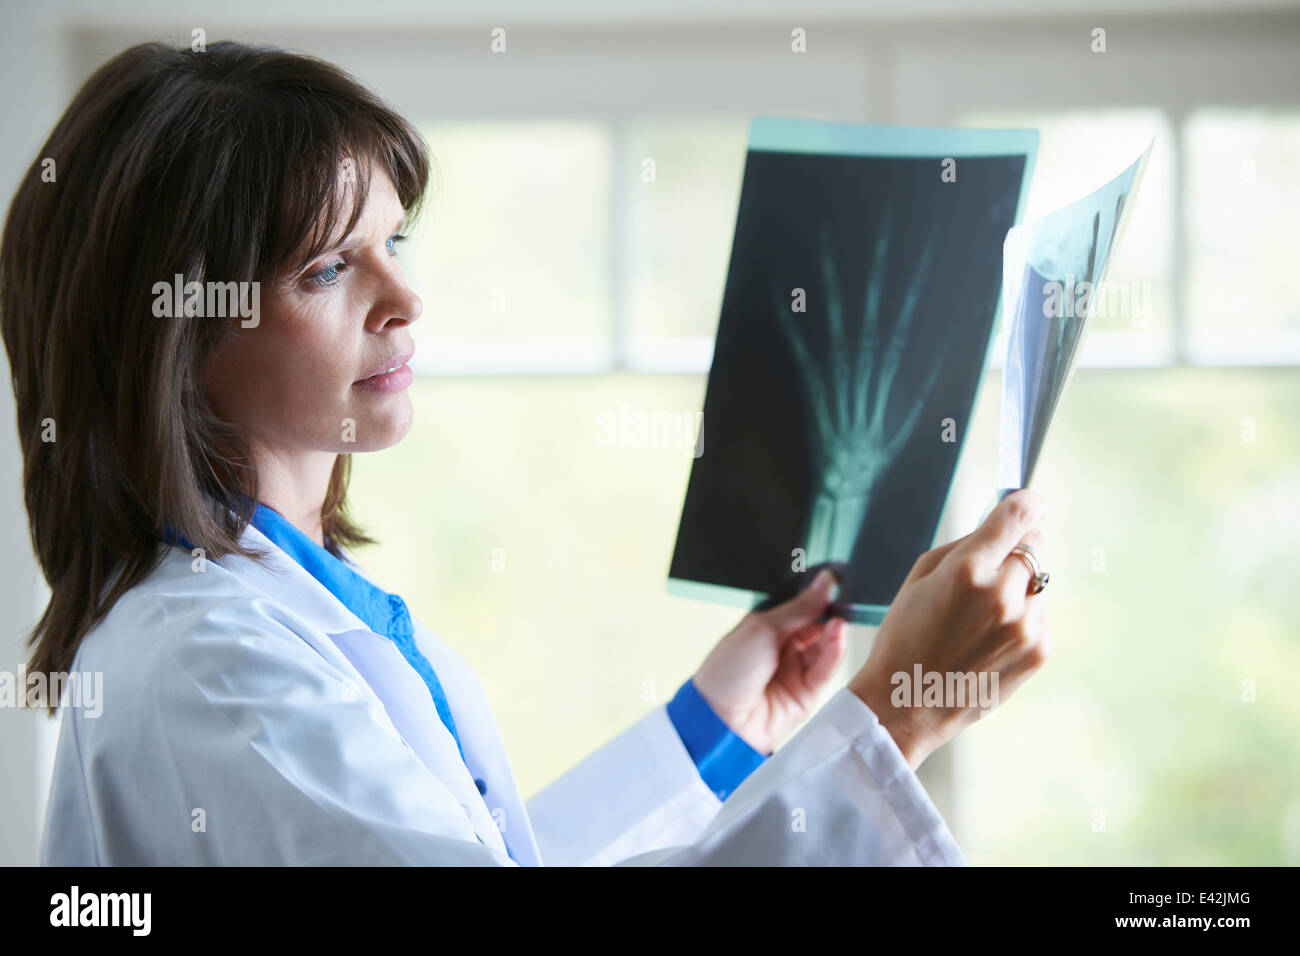 Doctor looking at xray image of hand Stock Photo